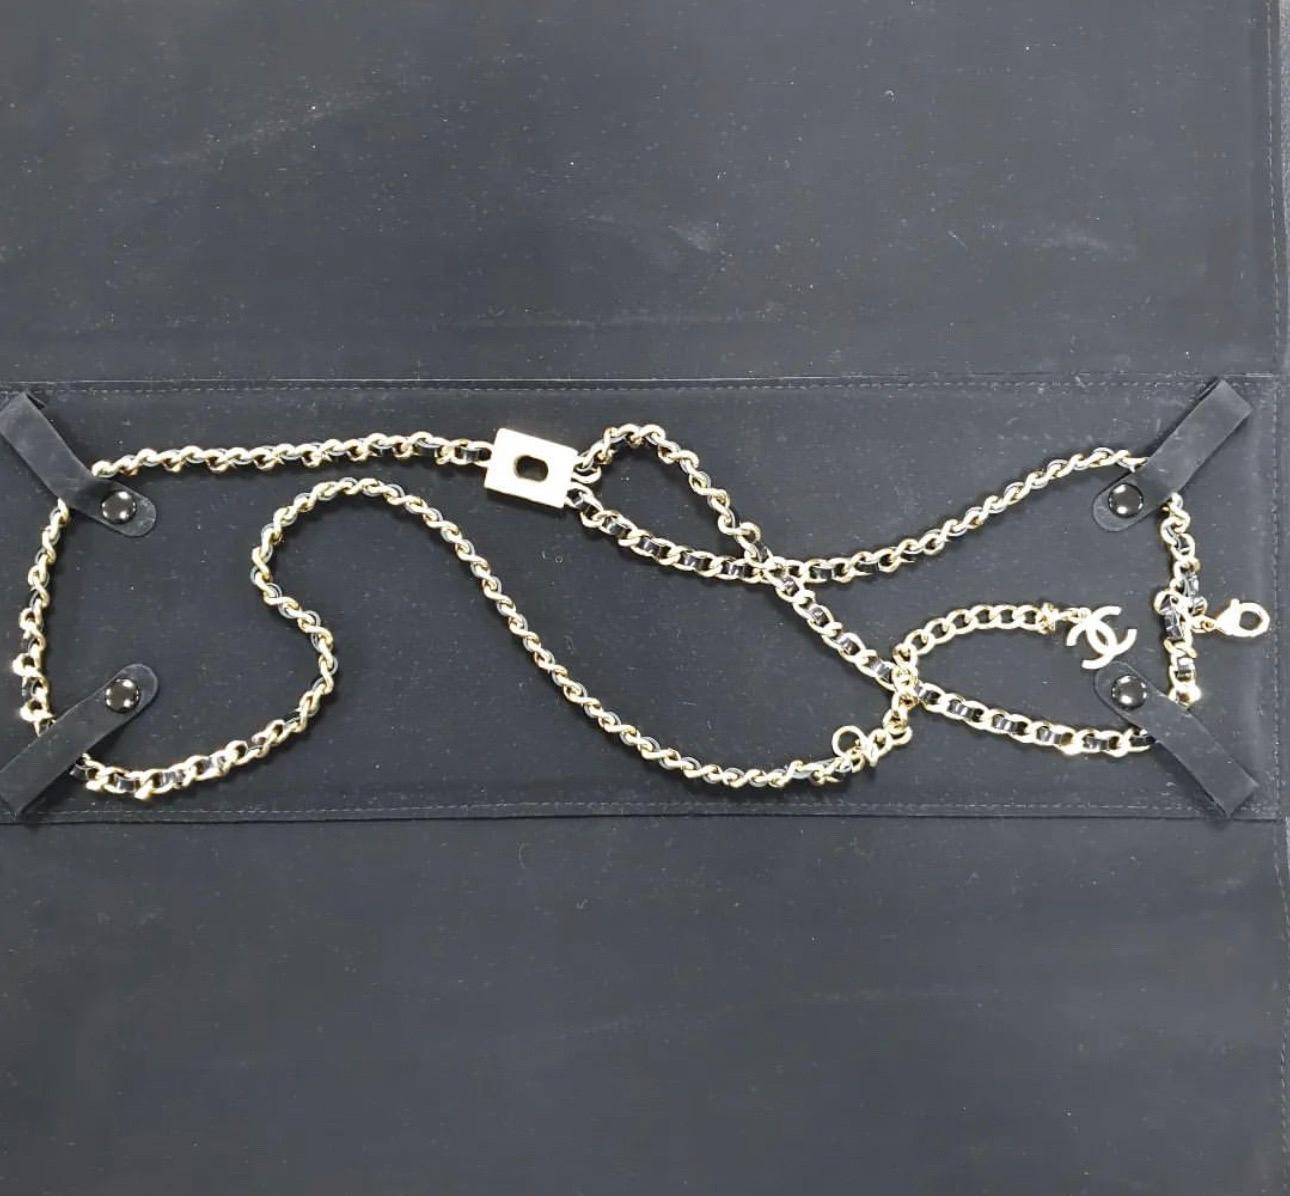 Chanel CC necklace/Belt with leather chains. 
Very edgy and modern looking. 
Stamp on the clasp B17P. 
Total length-97 cm
This necklace also can be worn as a belt.

Comes with the original box.


